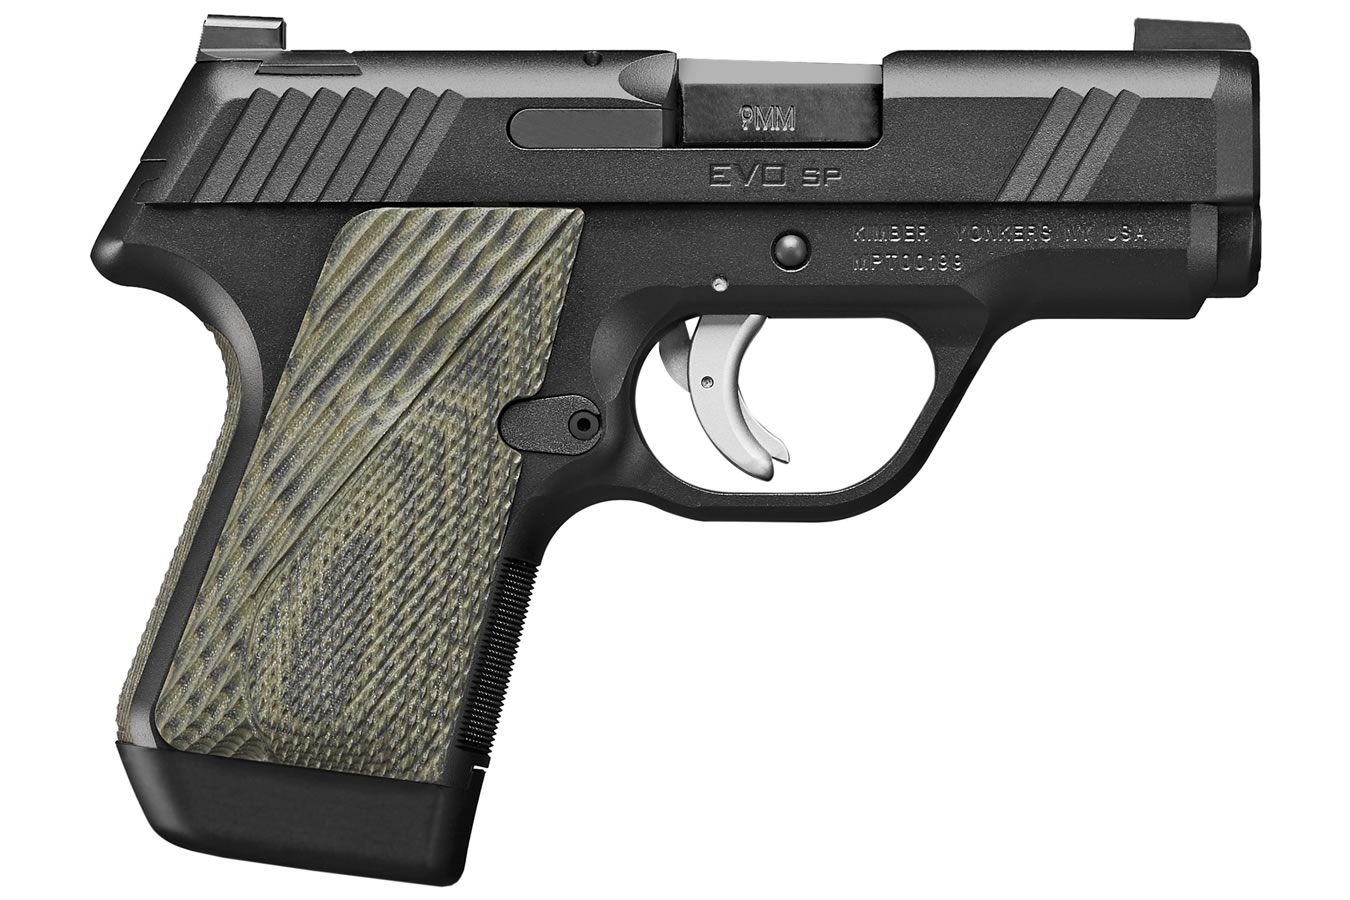 Kimber Evo Sp Tle 9mm Striker Fired Pistol With Night Sights 